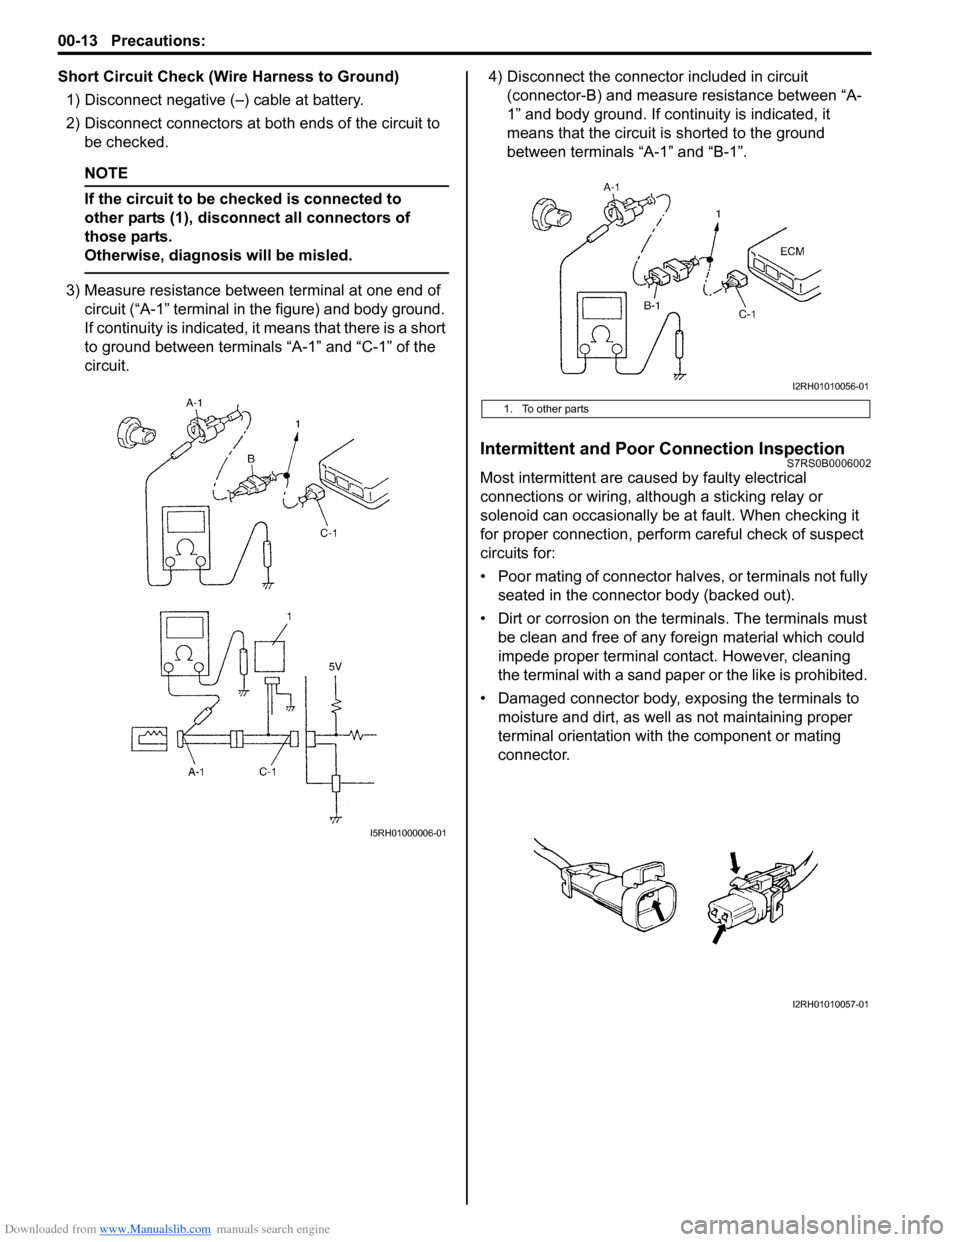 SUZUKI SWIFT 2006 2.G Service Workshop Manual Downloaded from www.Manualslib.com manuals search engine 00-13 Precautions: 
Short Circuit Check (Wire Harness to Ground)1) Disconnect negative (–) cable at battery.
2) Disconnect connectors at bot 